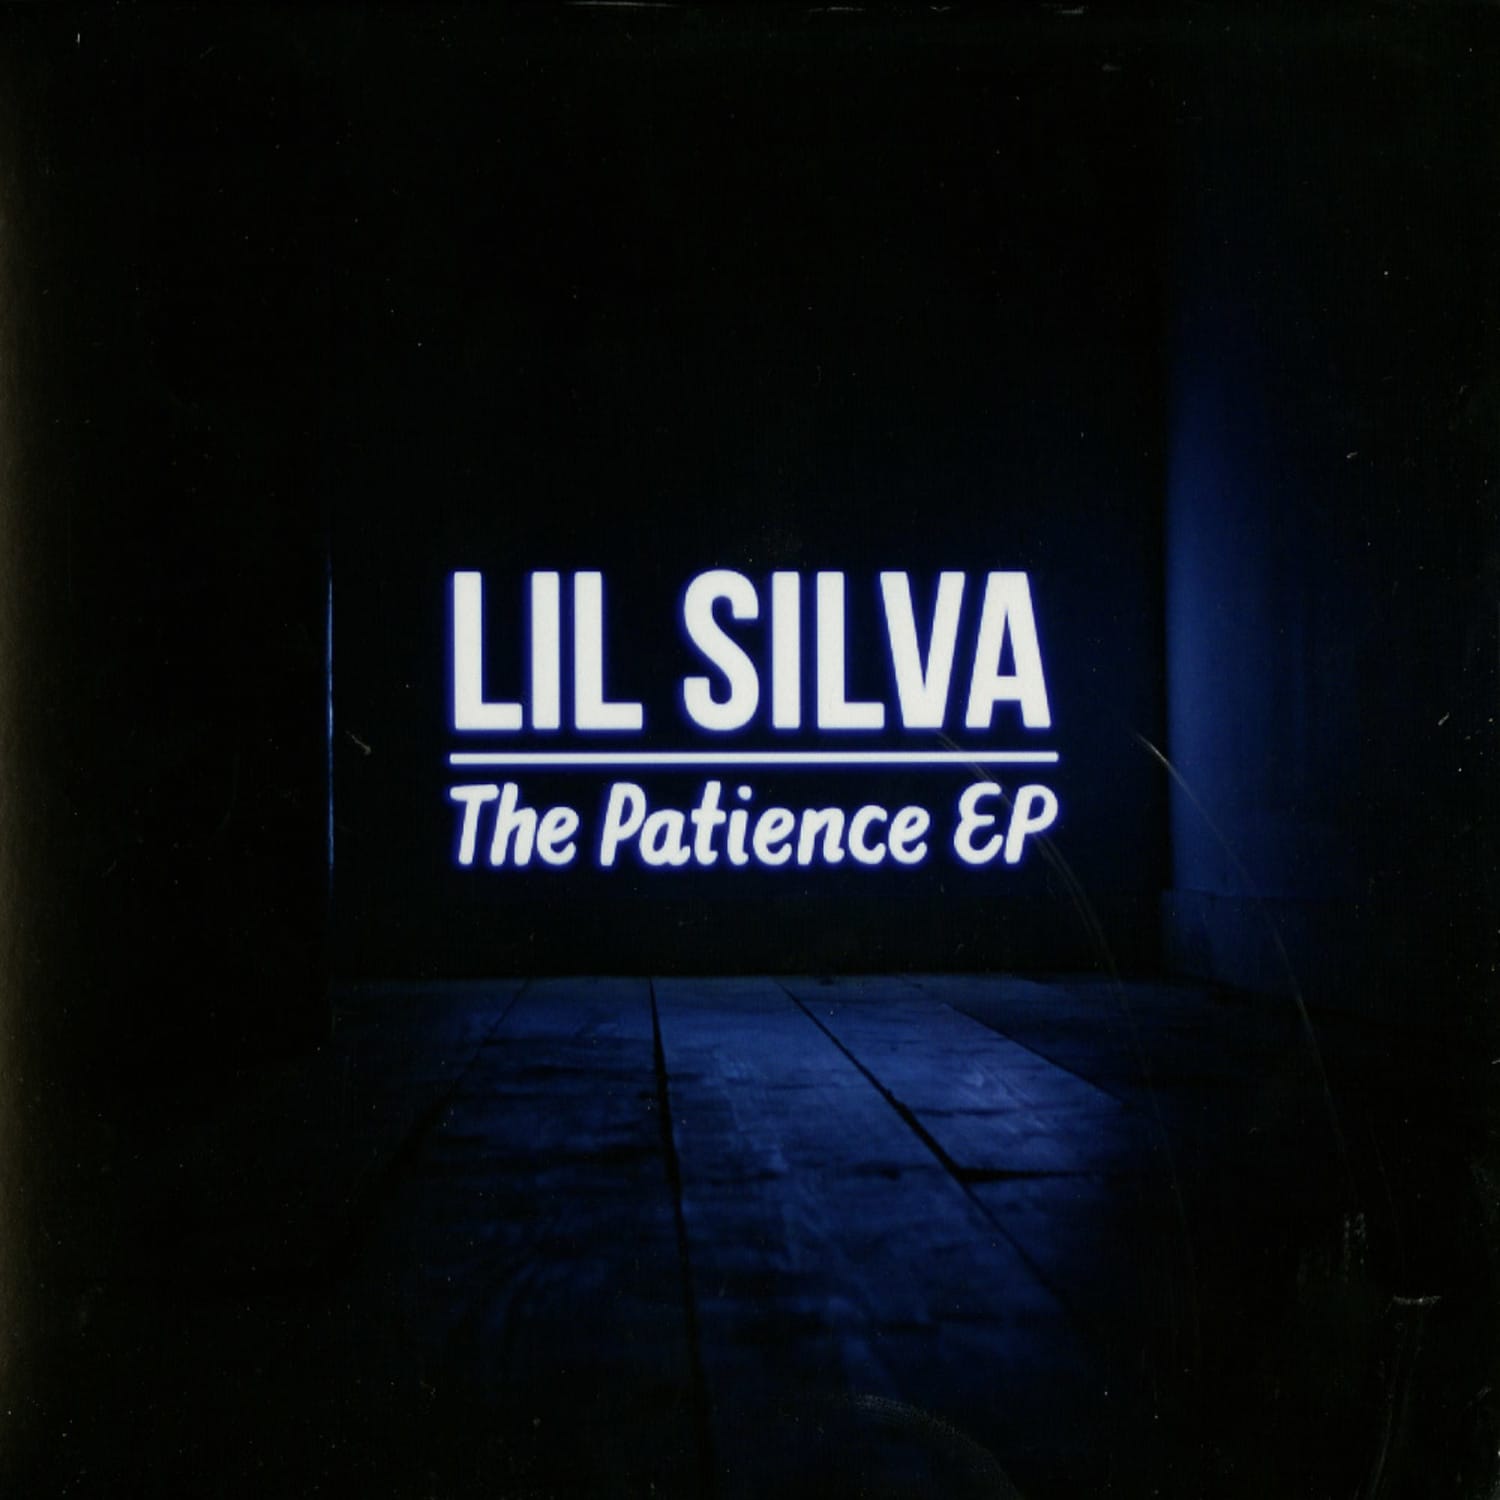 Lil Silva - THE PATIENCE EP